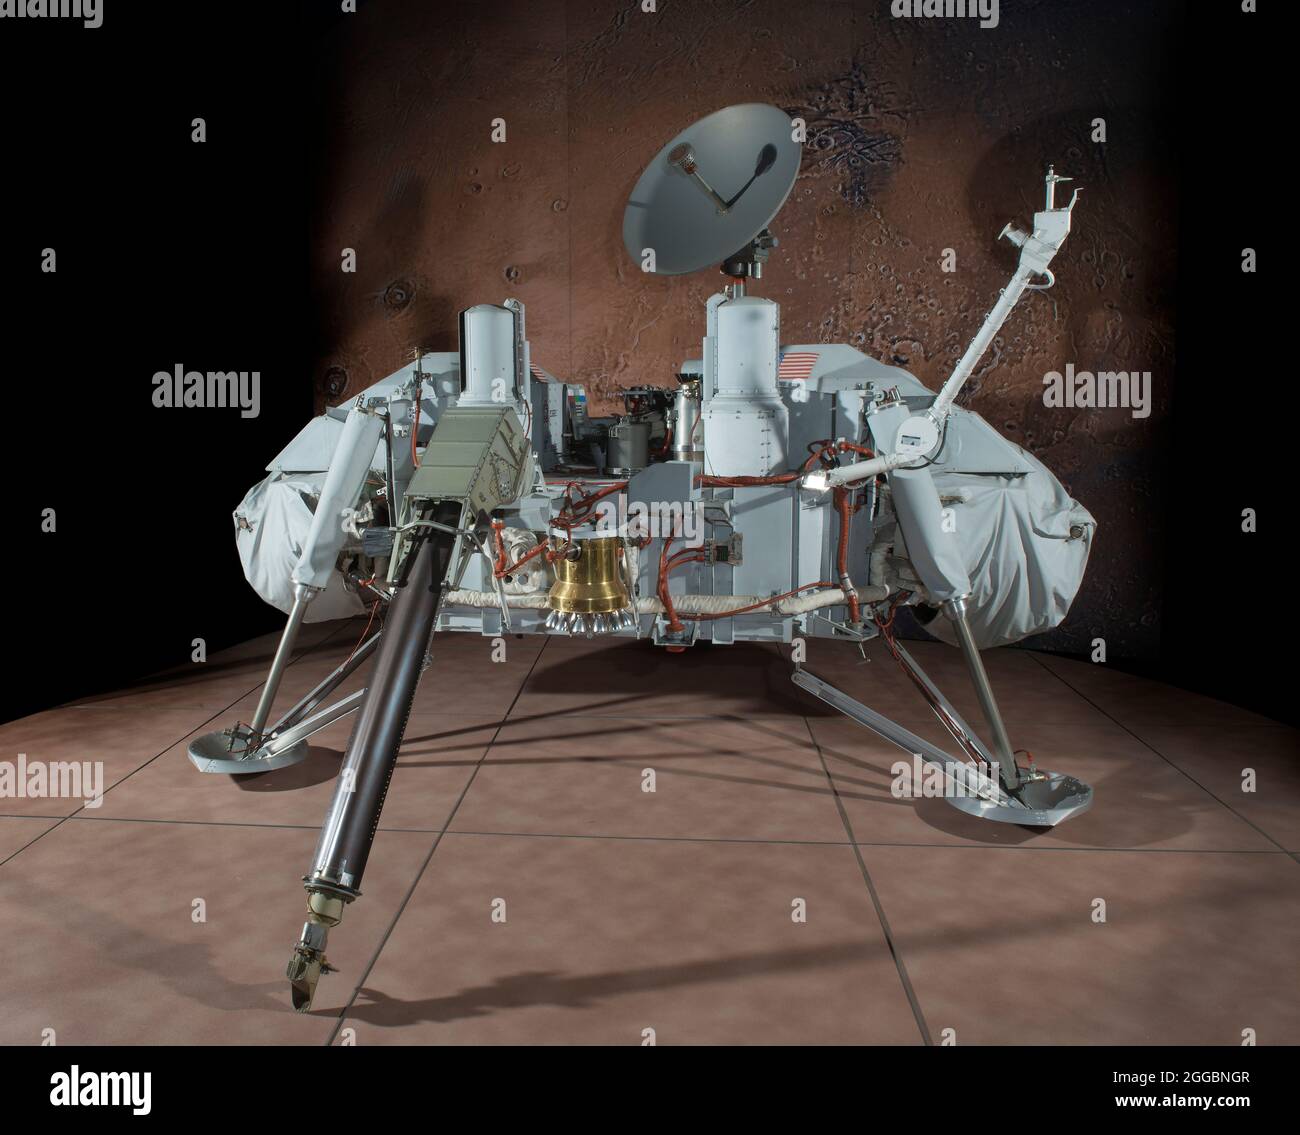 This is the proof test article of the Viking Mars Lander. For exploration of Mars, Viking represented the culmination of a series of exploratory missions that had begun in 1964 with Mariner 4 and continued with Mariner 6 and Mariner 7 flybys in 1969 and a Mariner 9 orbital mission in 1971 and 1972. The Viking mission used two identical spacecraft, each consisting of a lander and an orbiter. Launched on August 20, 1975 from the Kennedy Space Center in Florida, Viking 1 spent nearly a year cruising to Mars, placed an orbiter in operation around the planet, and landed on July, 20 1976 on the Chry Stock Photo